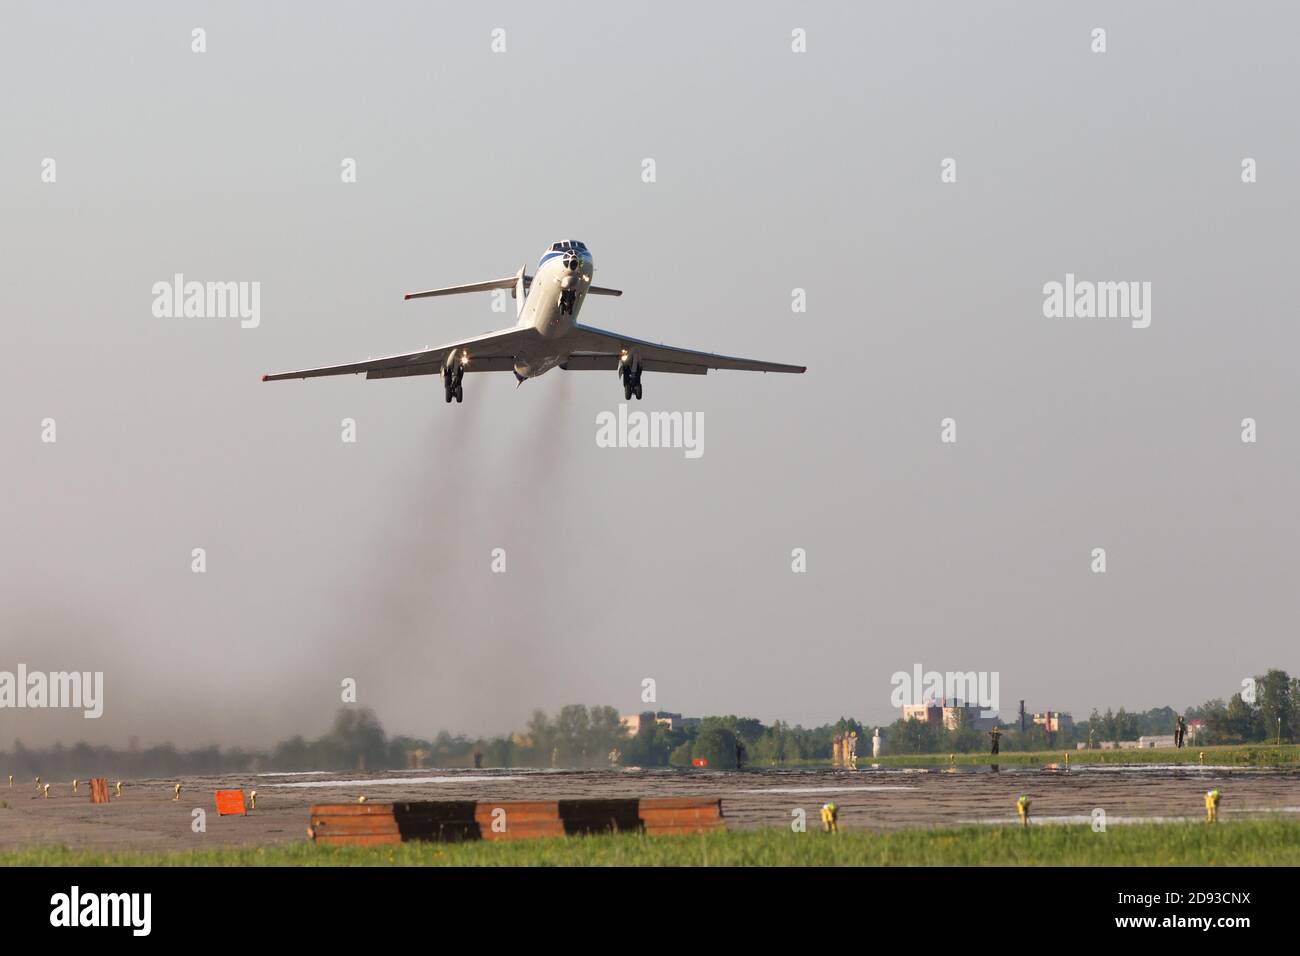 Airplane take off from military airfield. Smoke from engines, low over the runway. Transportation, aviation. Stock Photo